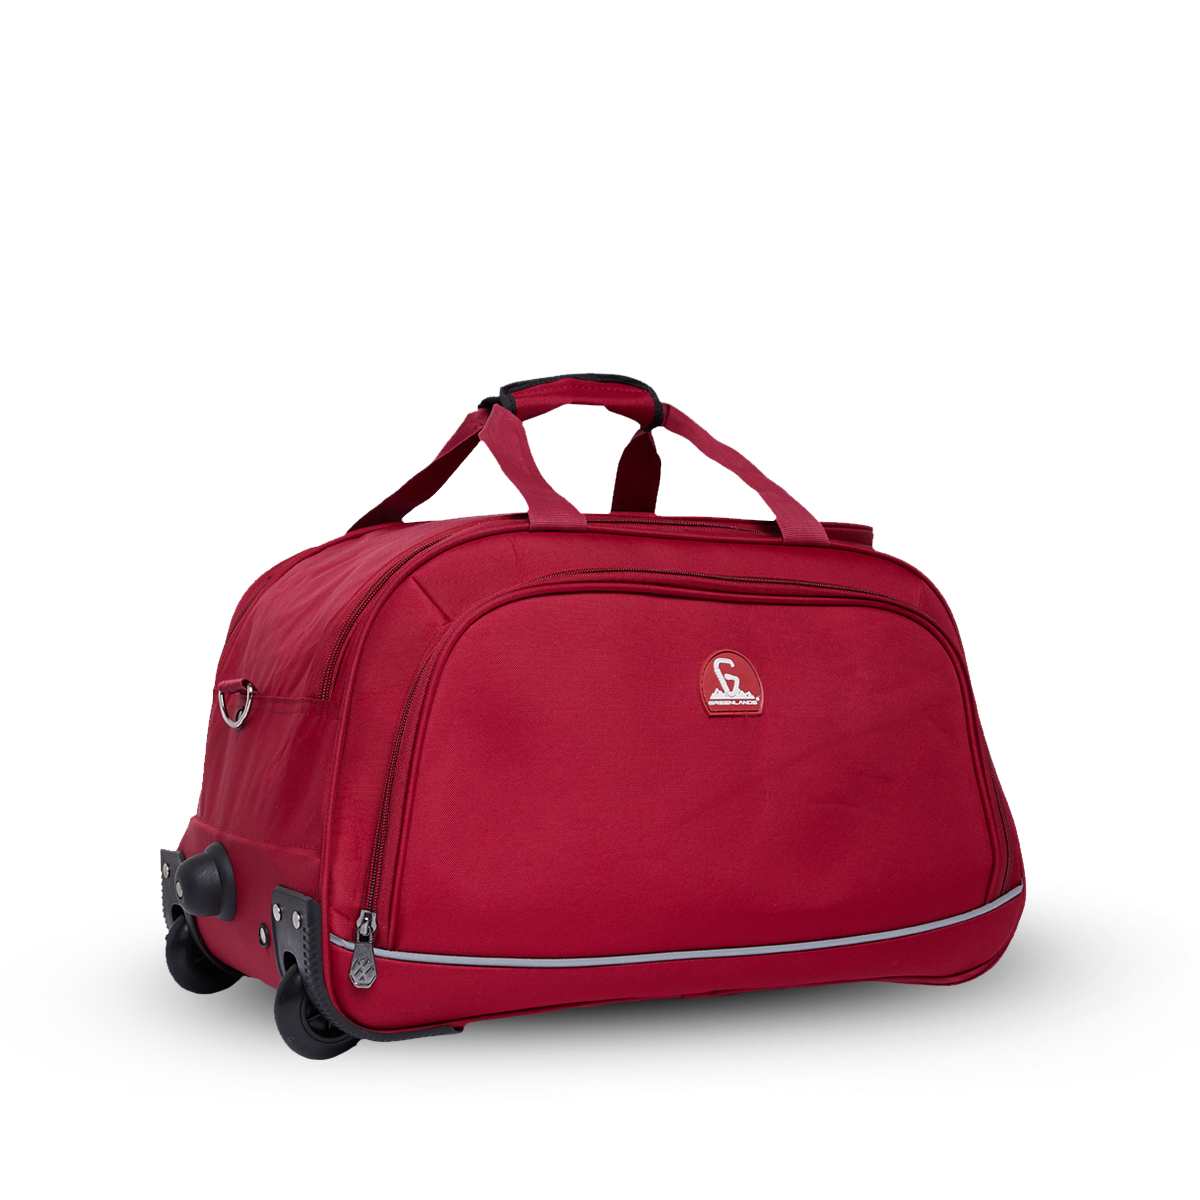 Nifty Duffle Bag Red 45 ltr